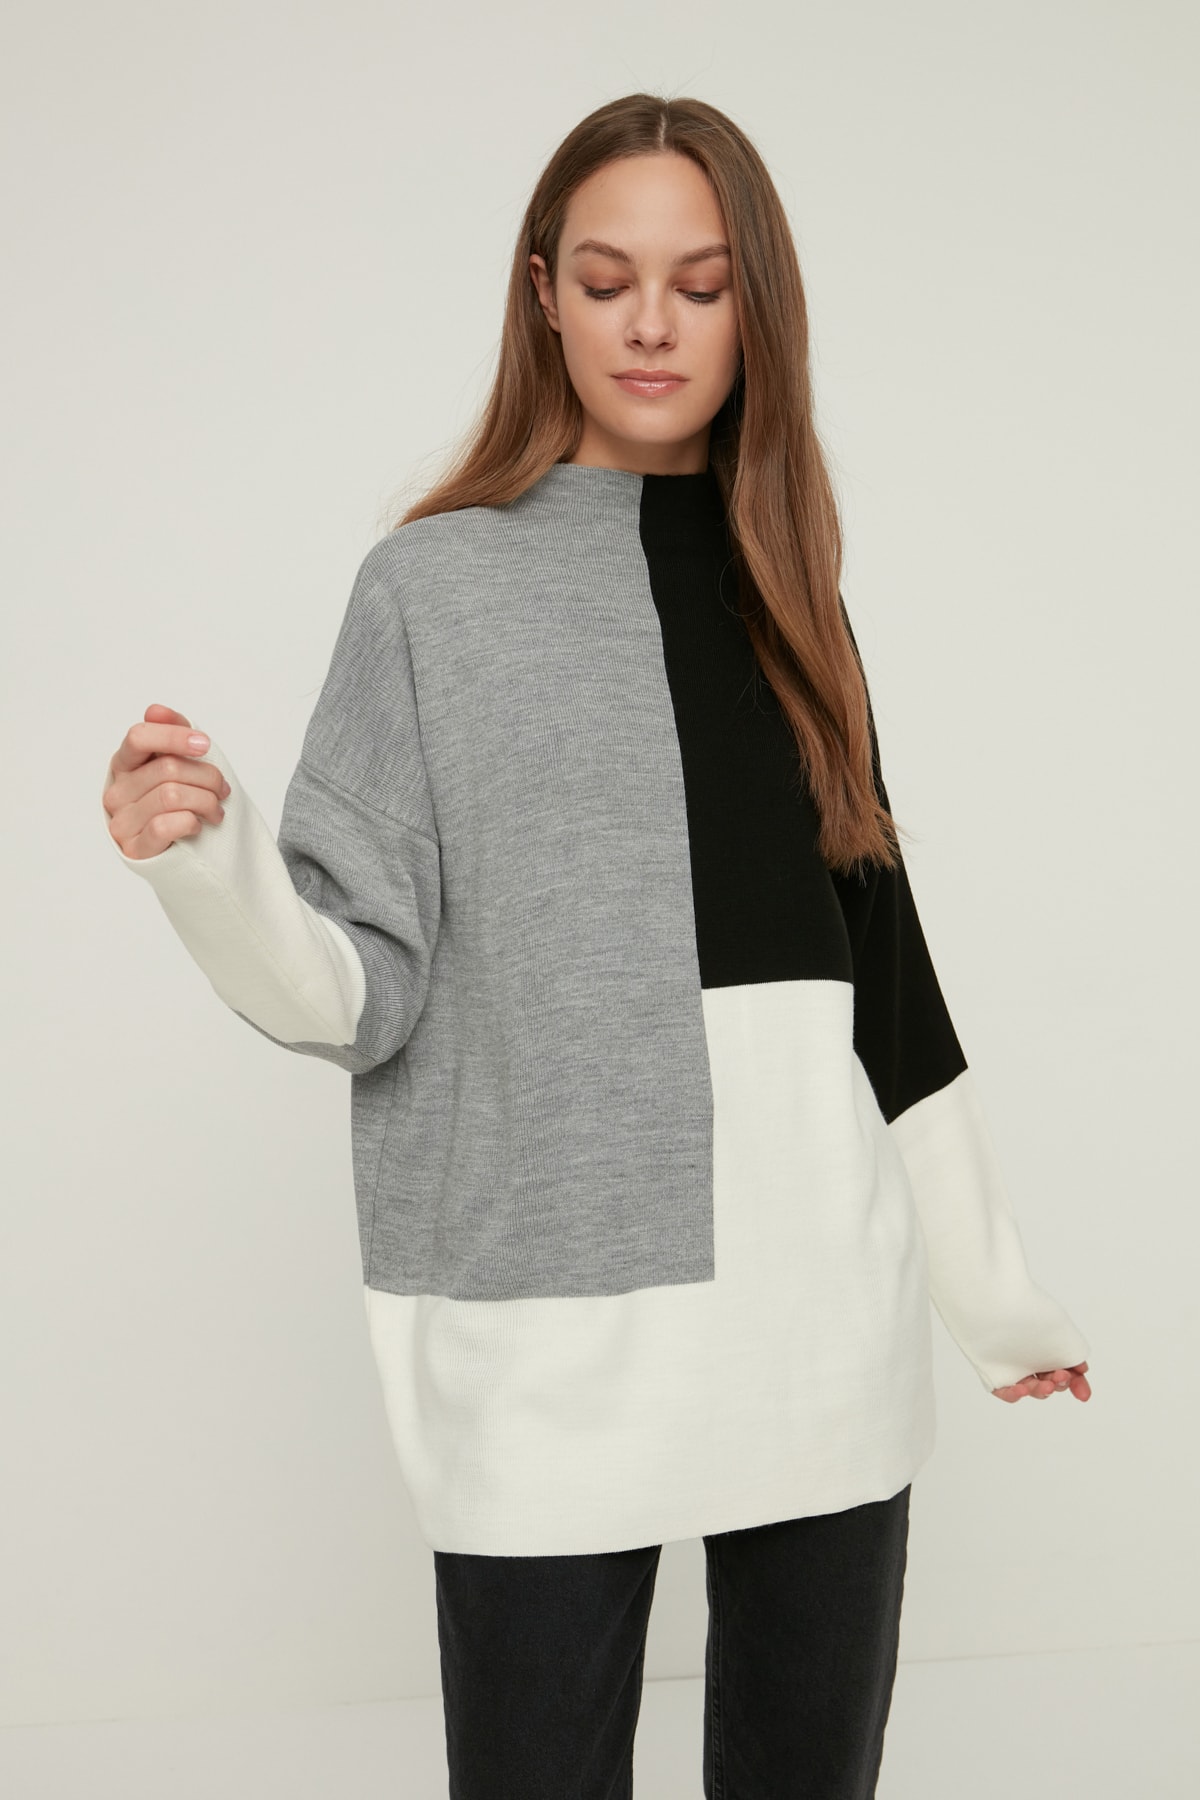 Trendyol Black Color Block Stand Up Knitwear Sweater